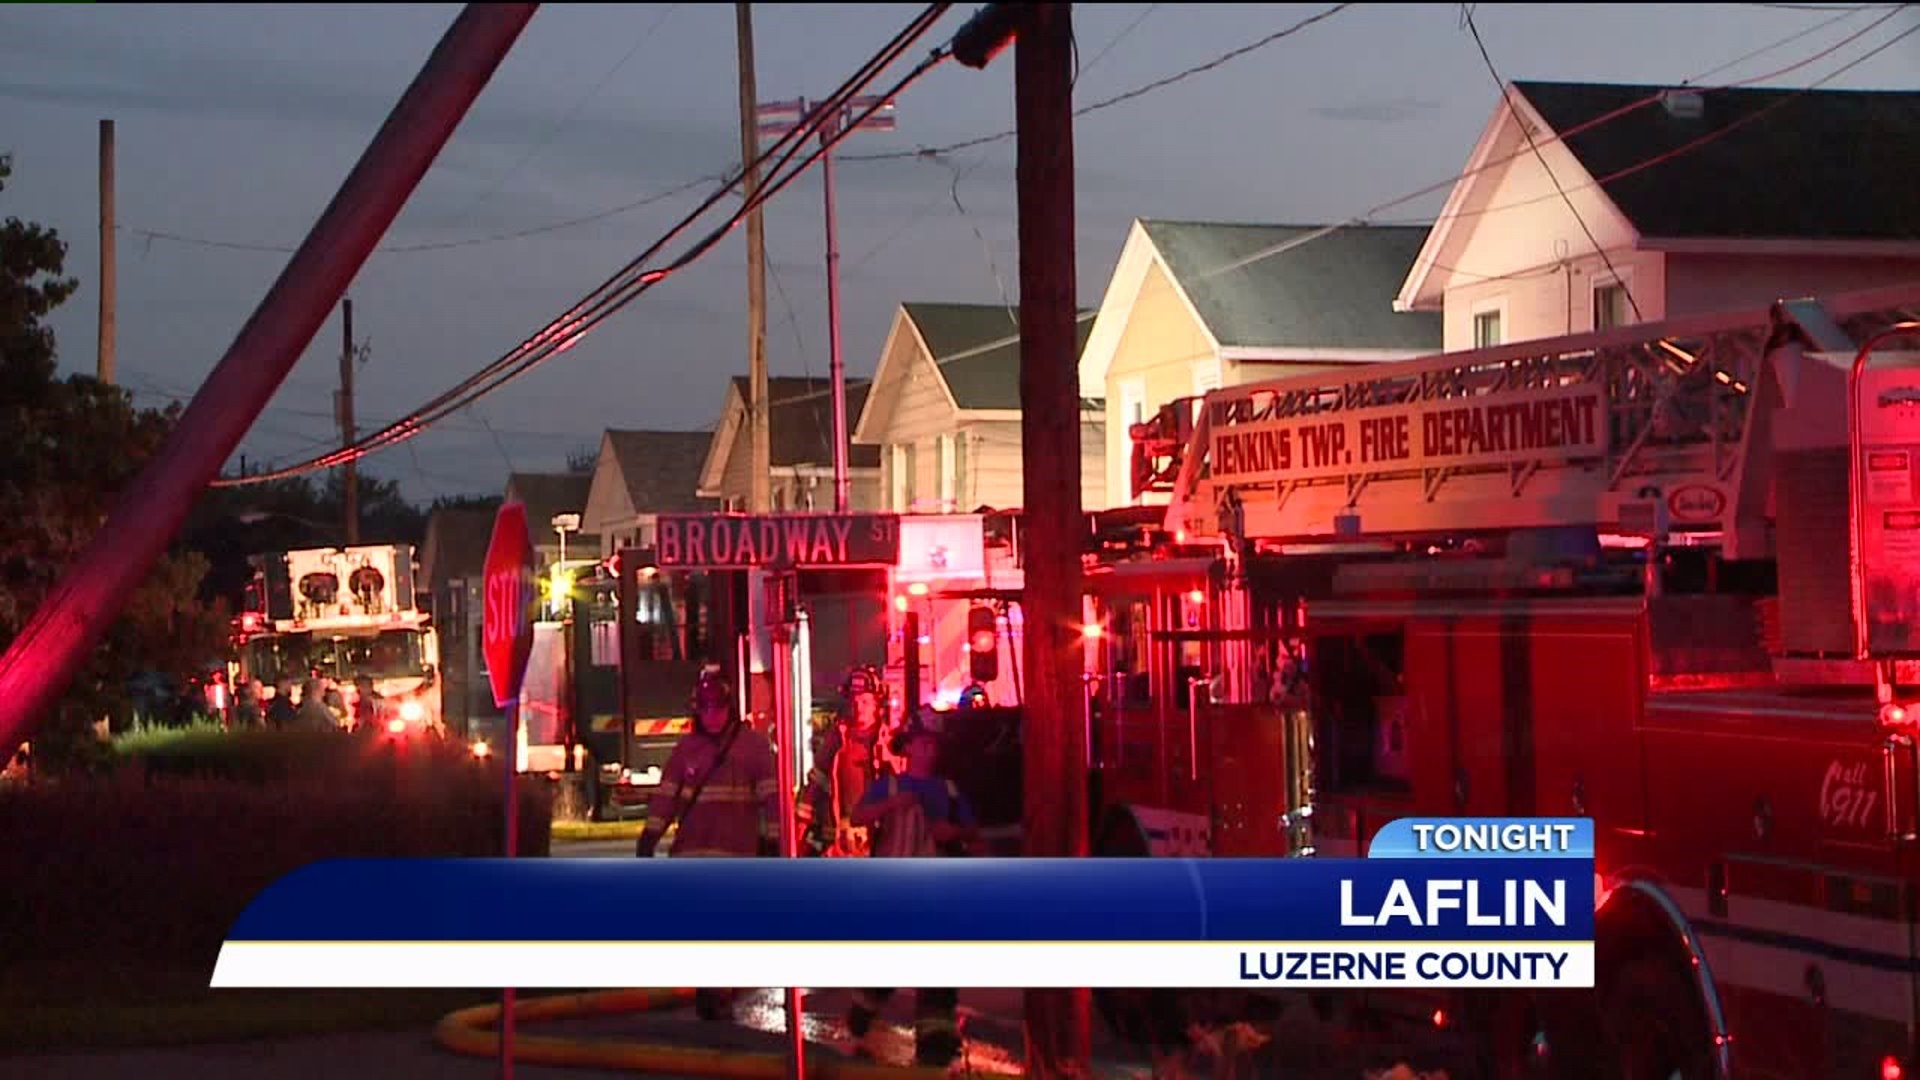 Fire Sparked at Home in Laflin